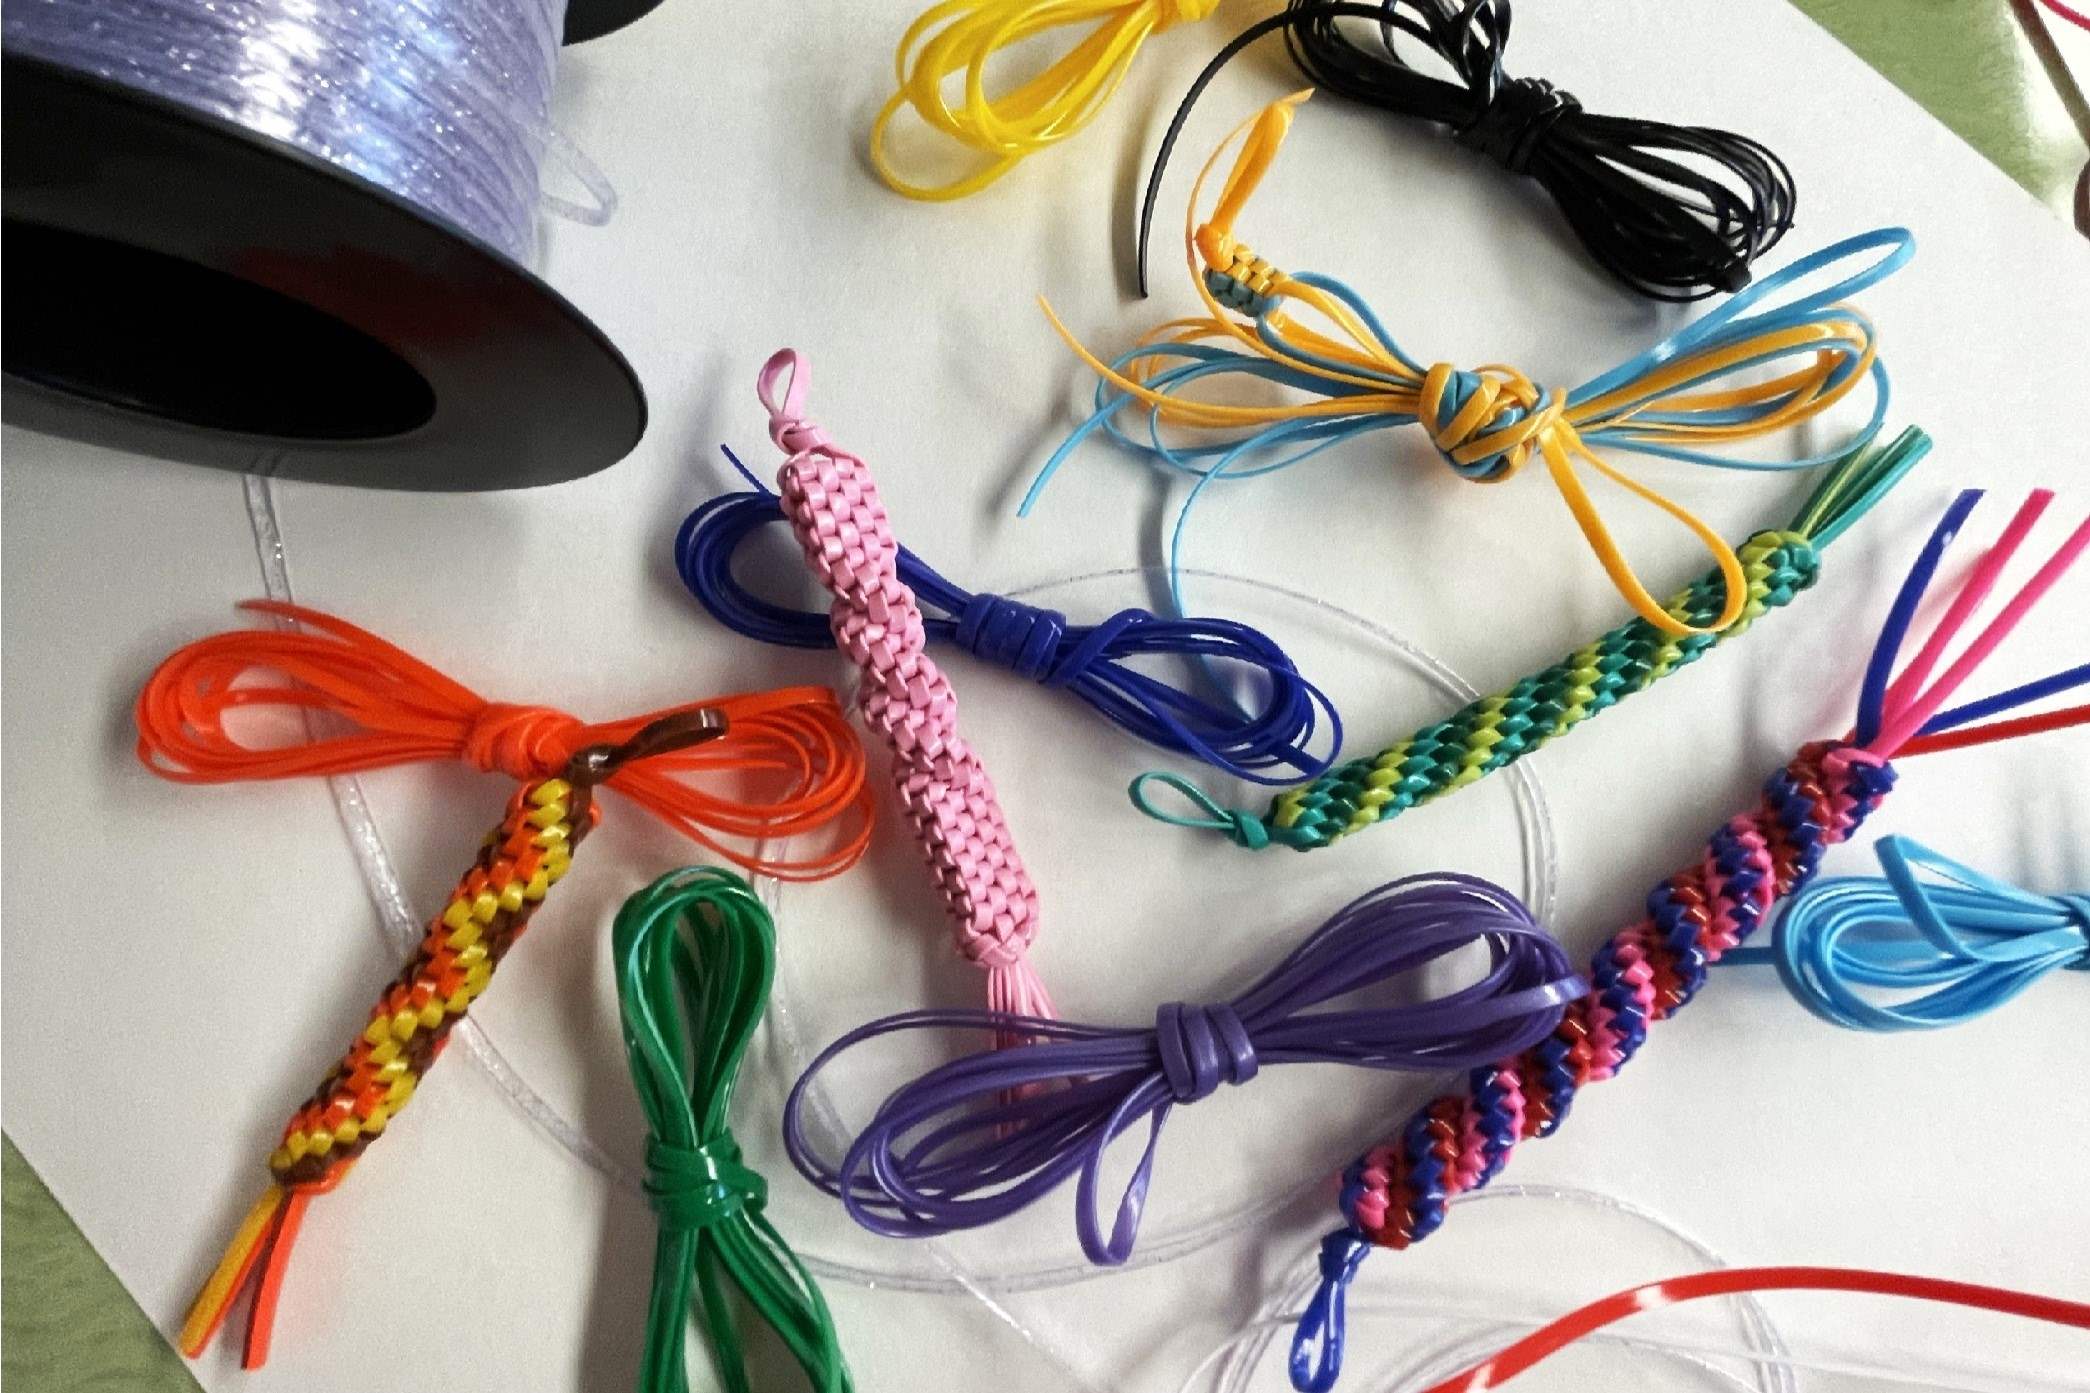 DIY Crafting: Creating Your Own Lanyard With Ease